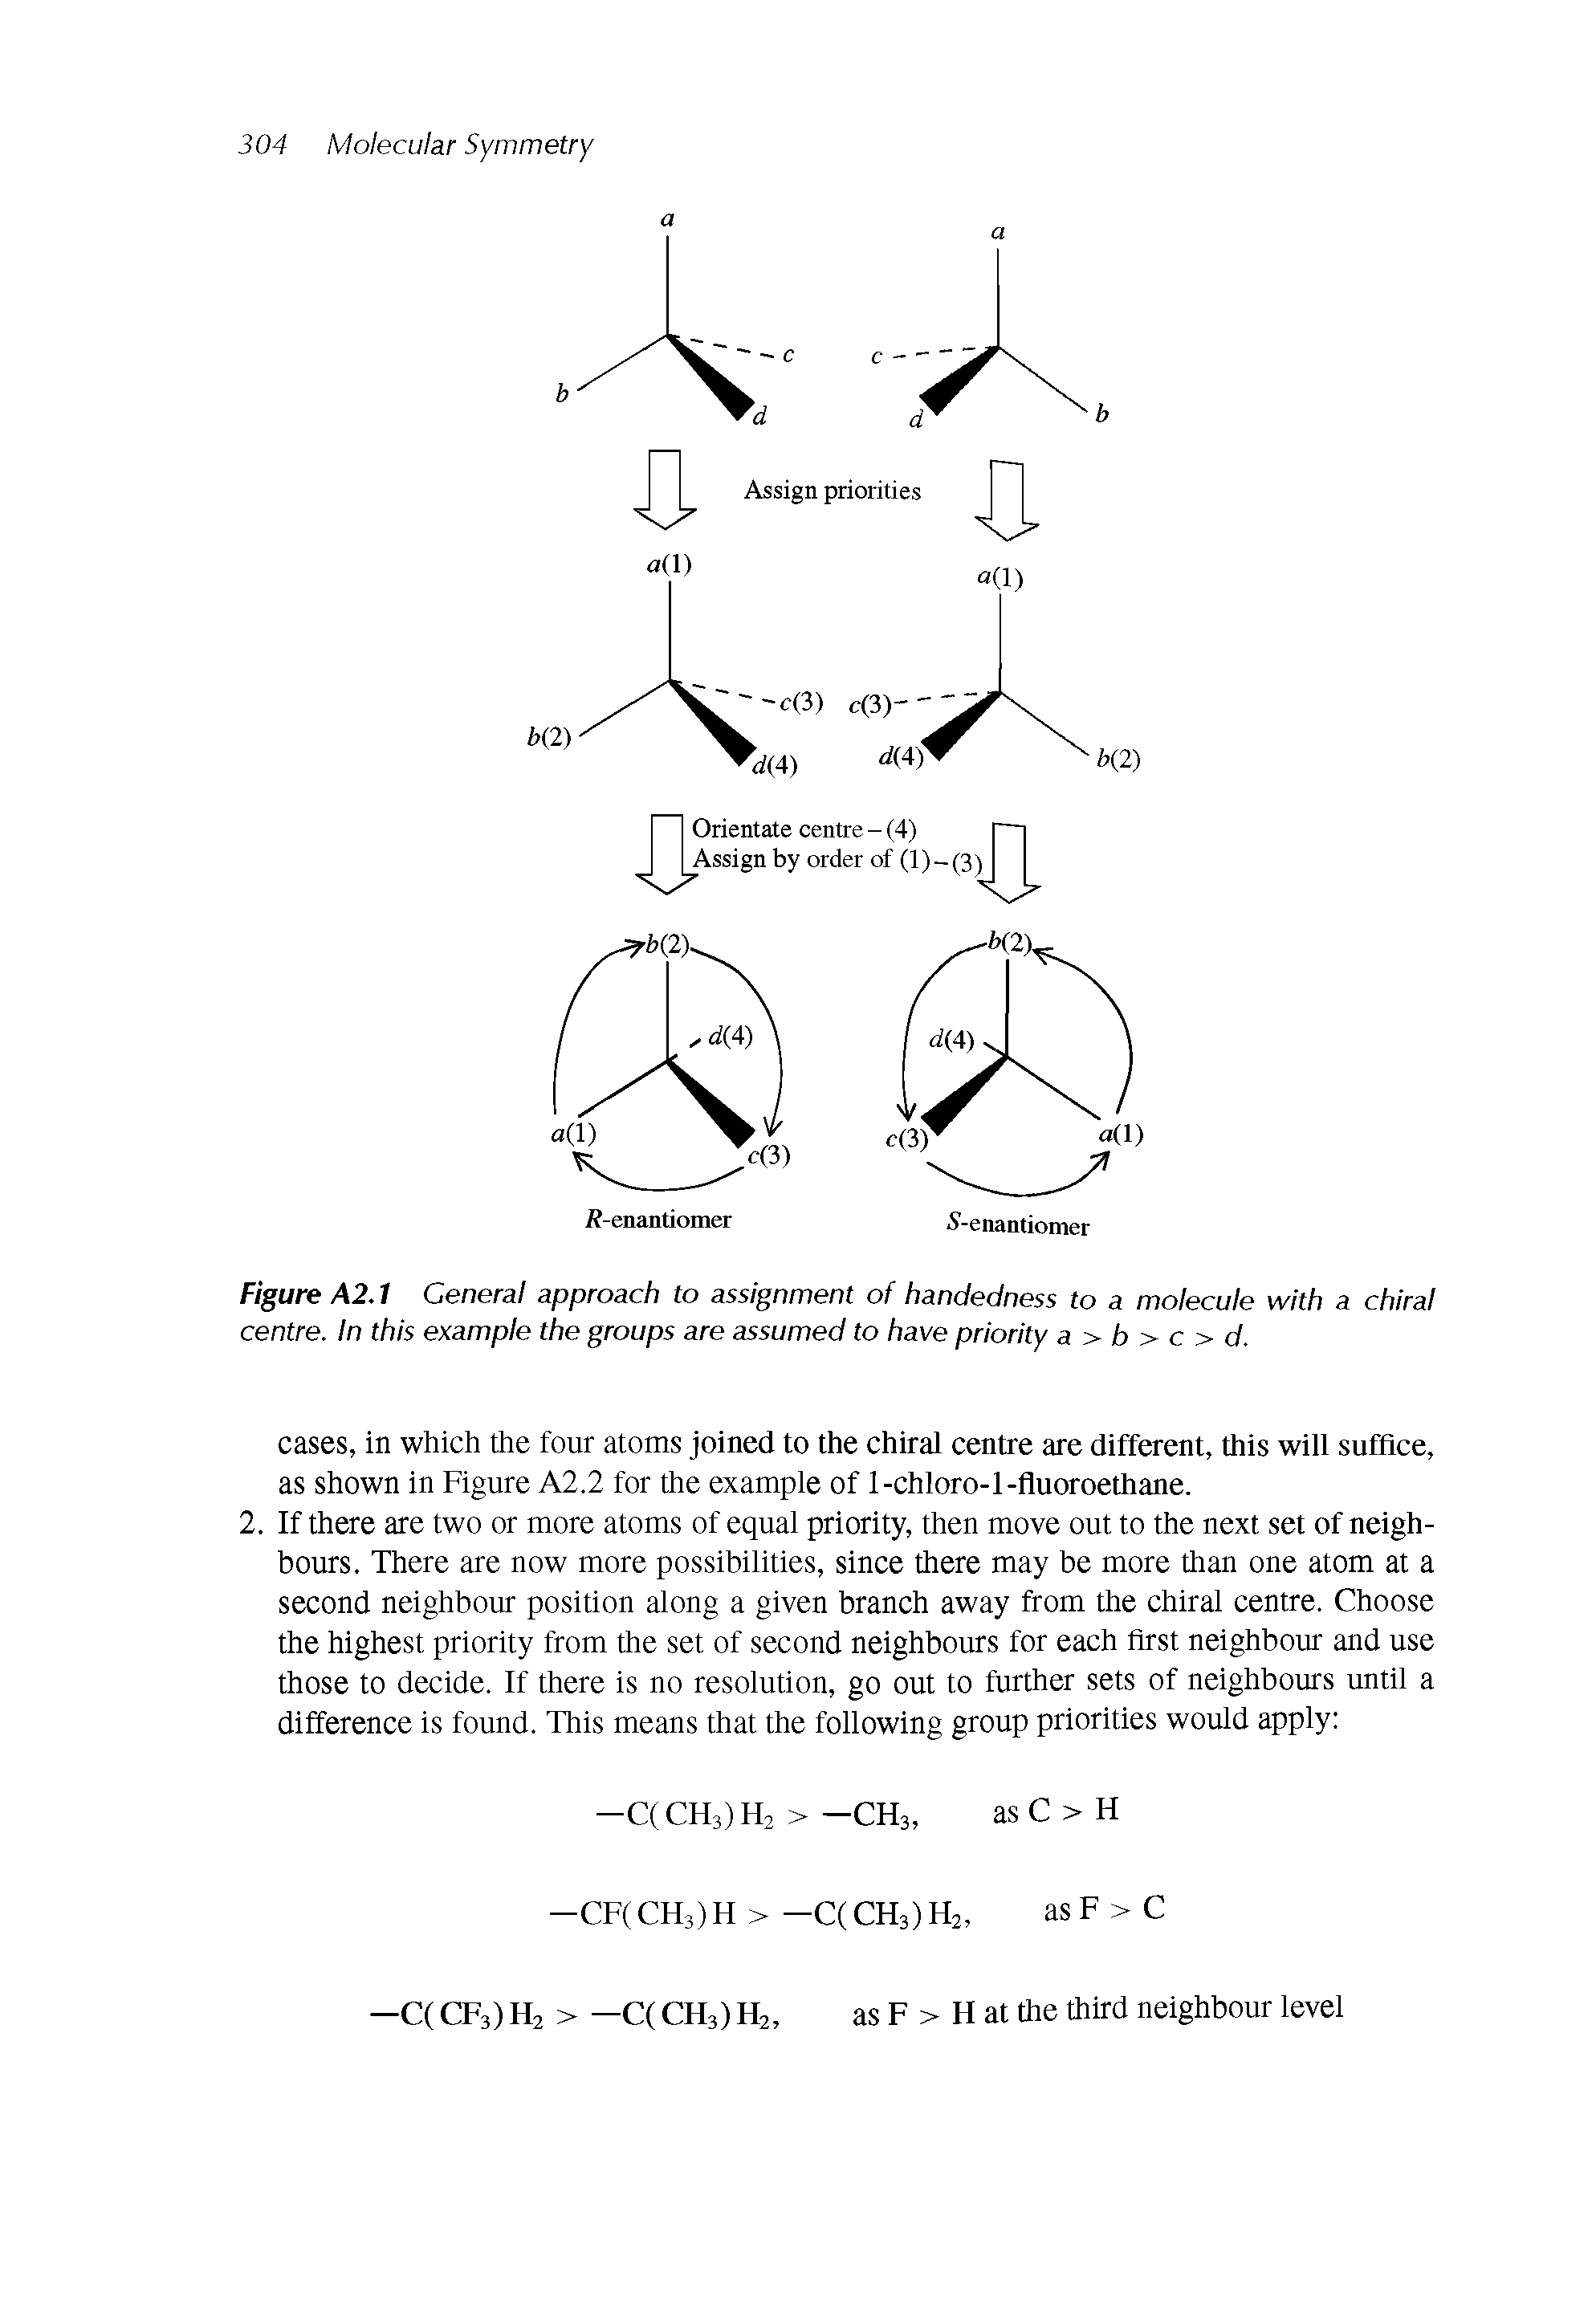 Figure A2.1 General approach to assignment of handedness to a molecule with a chiral centre. In this example the groups are assumed to have priority a > b > c > d.